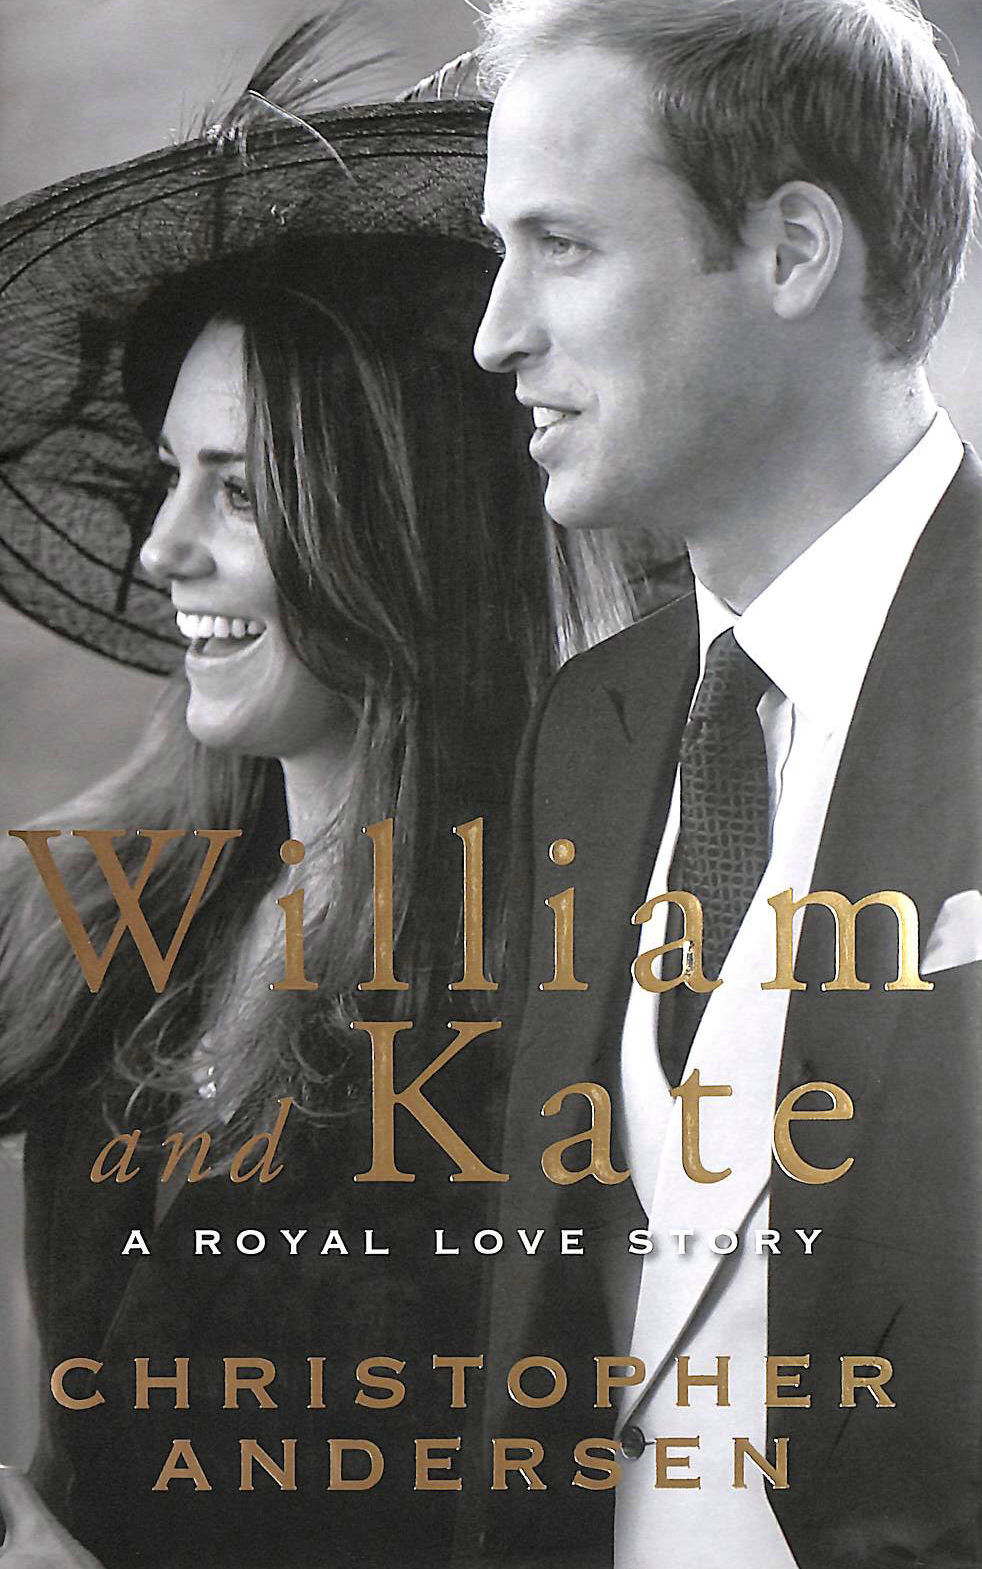 ANDERSEN, CHRISTOPHER - William and Kate: A Royal Love Story